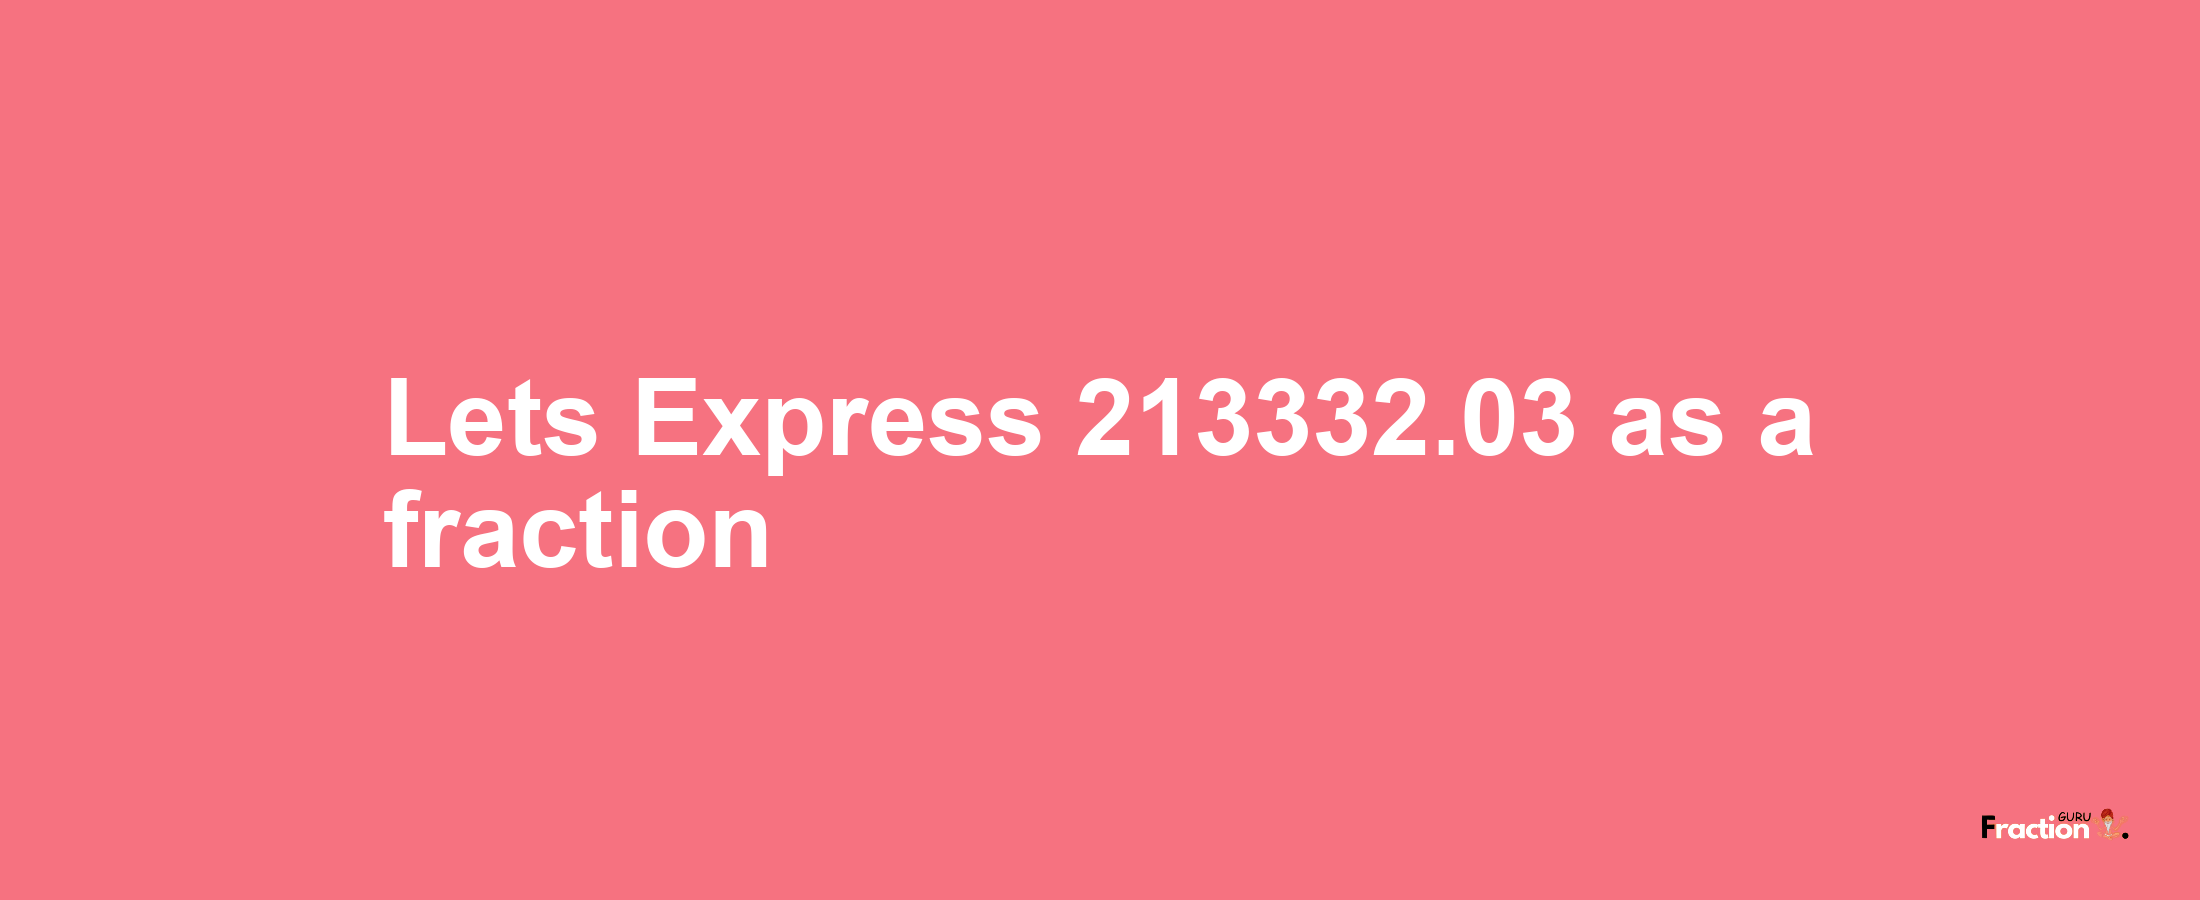 Lets Express 213332.03 as afraction